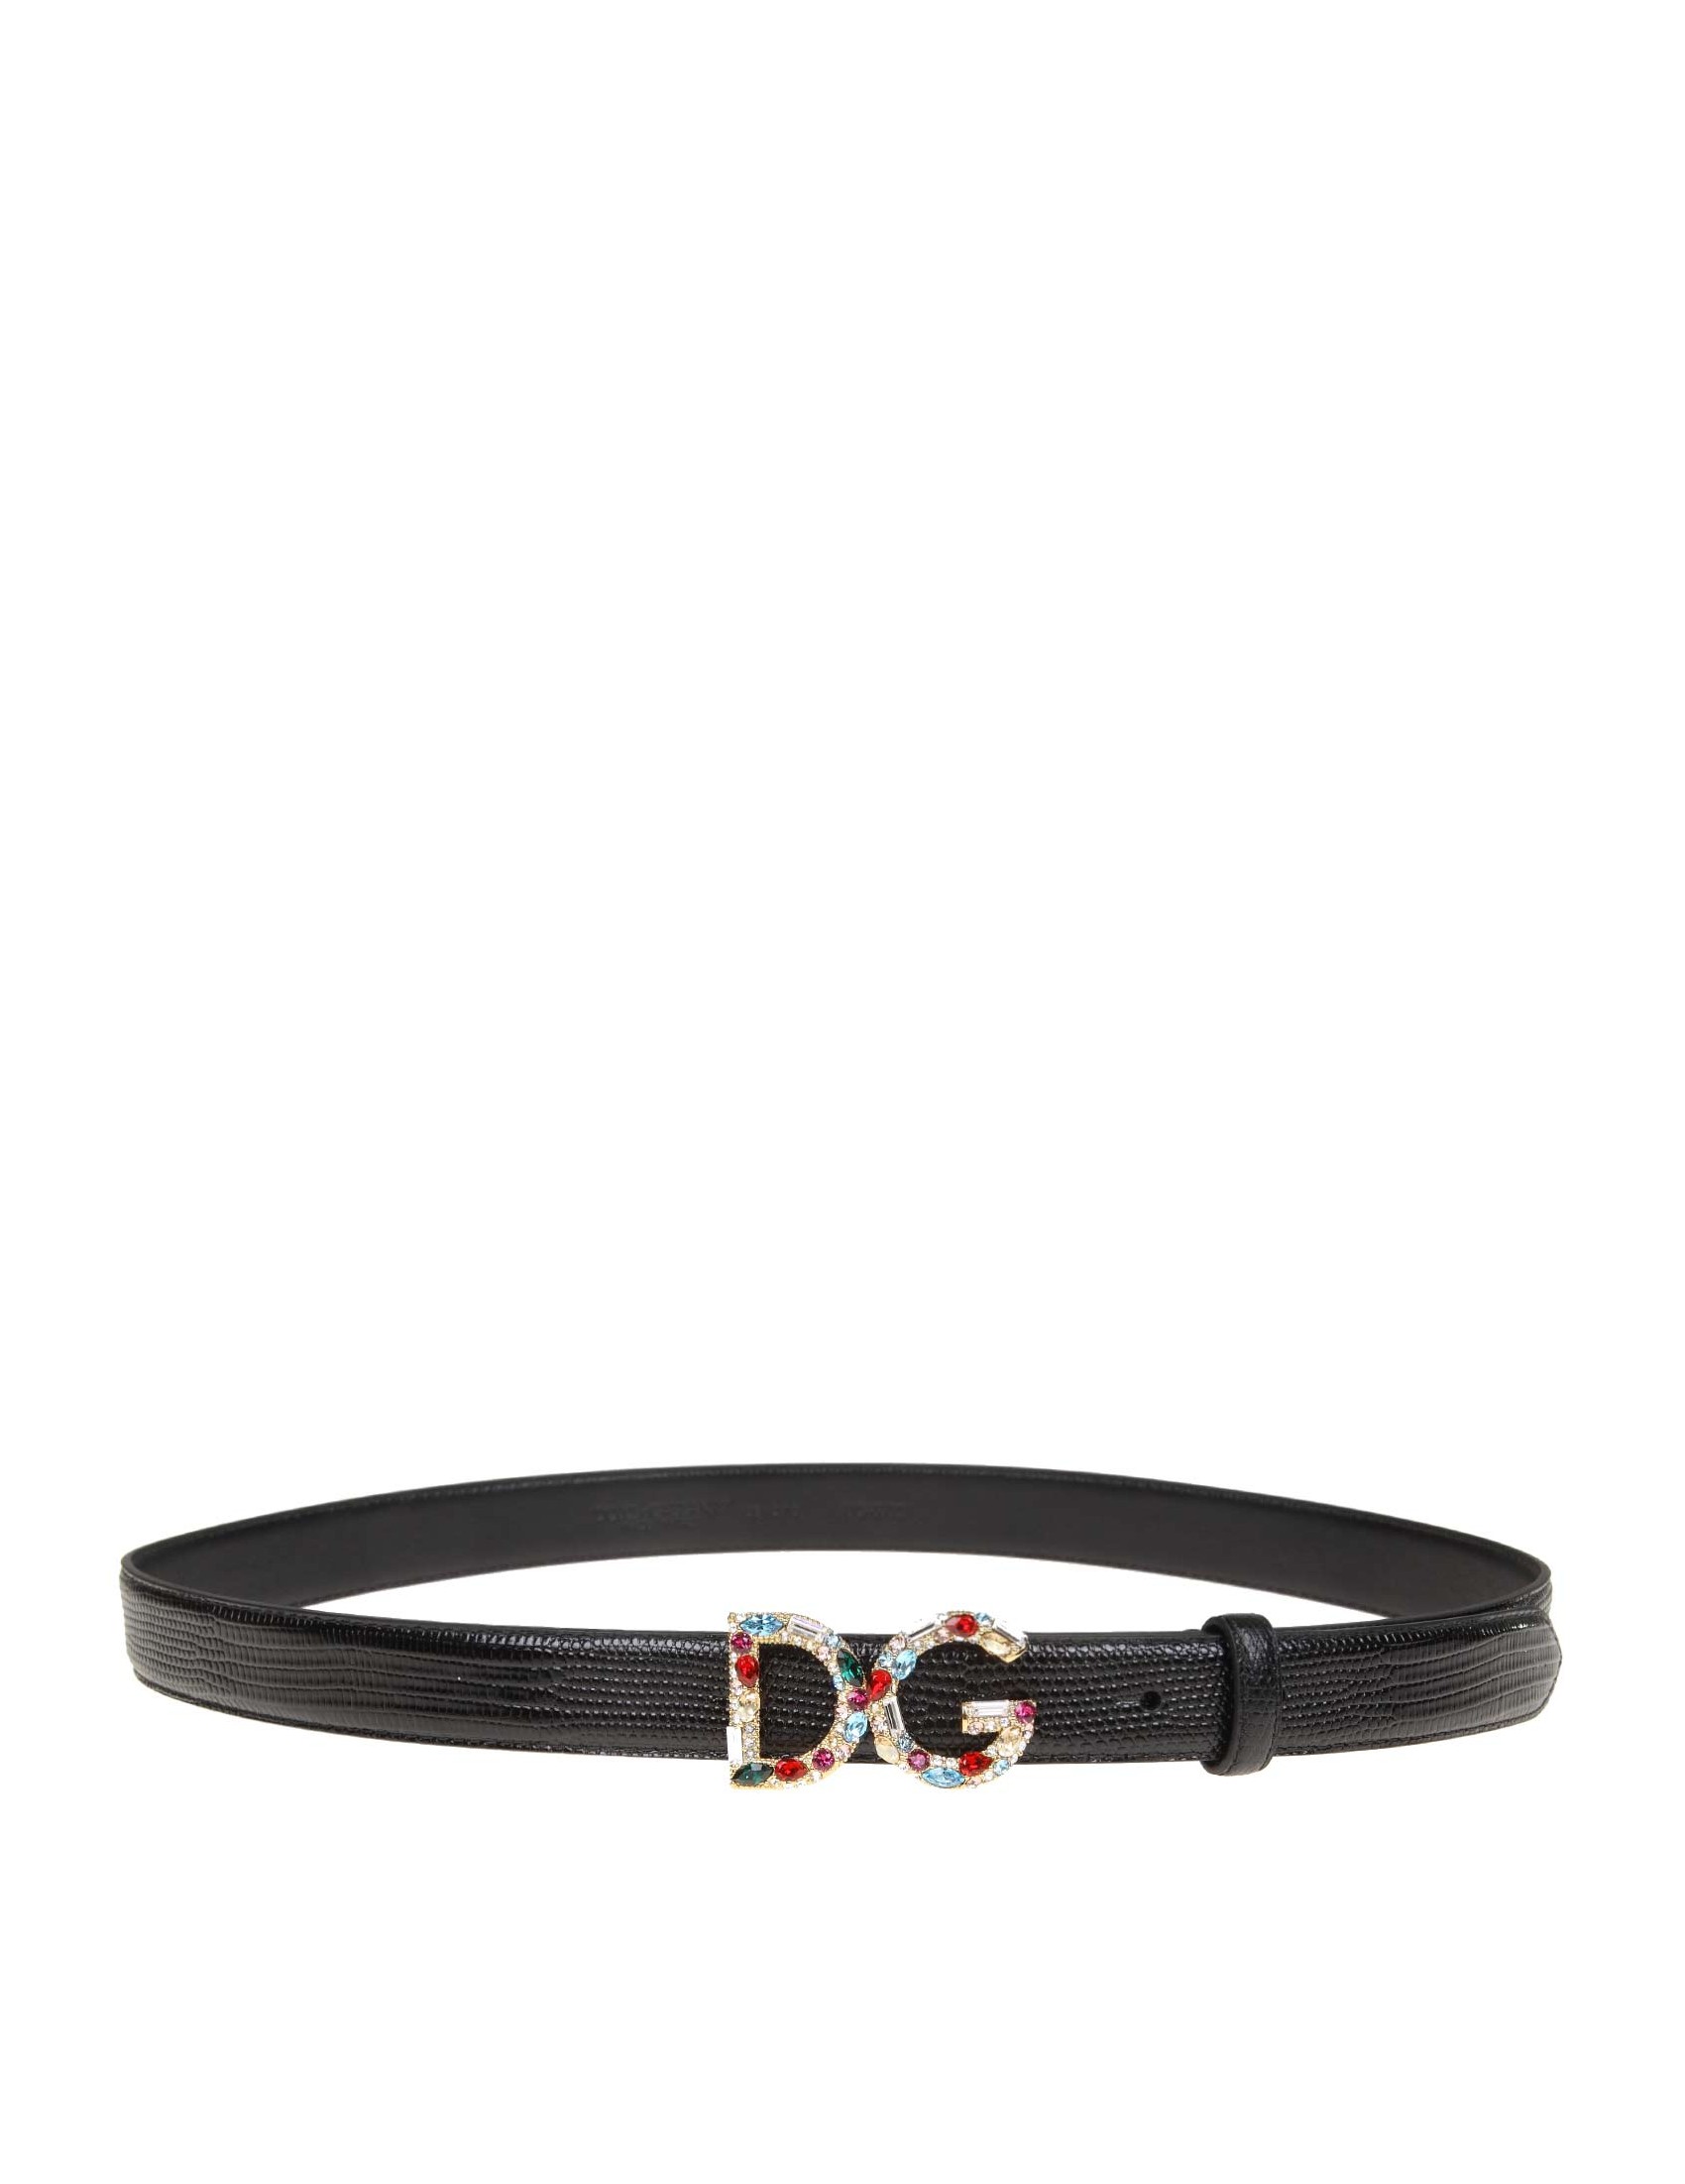 WOMAN BELT WITH MULTICOLOR CRYSTAL BUCKLE